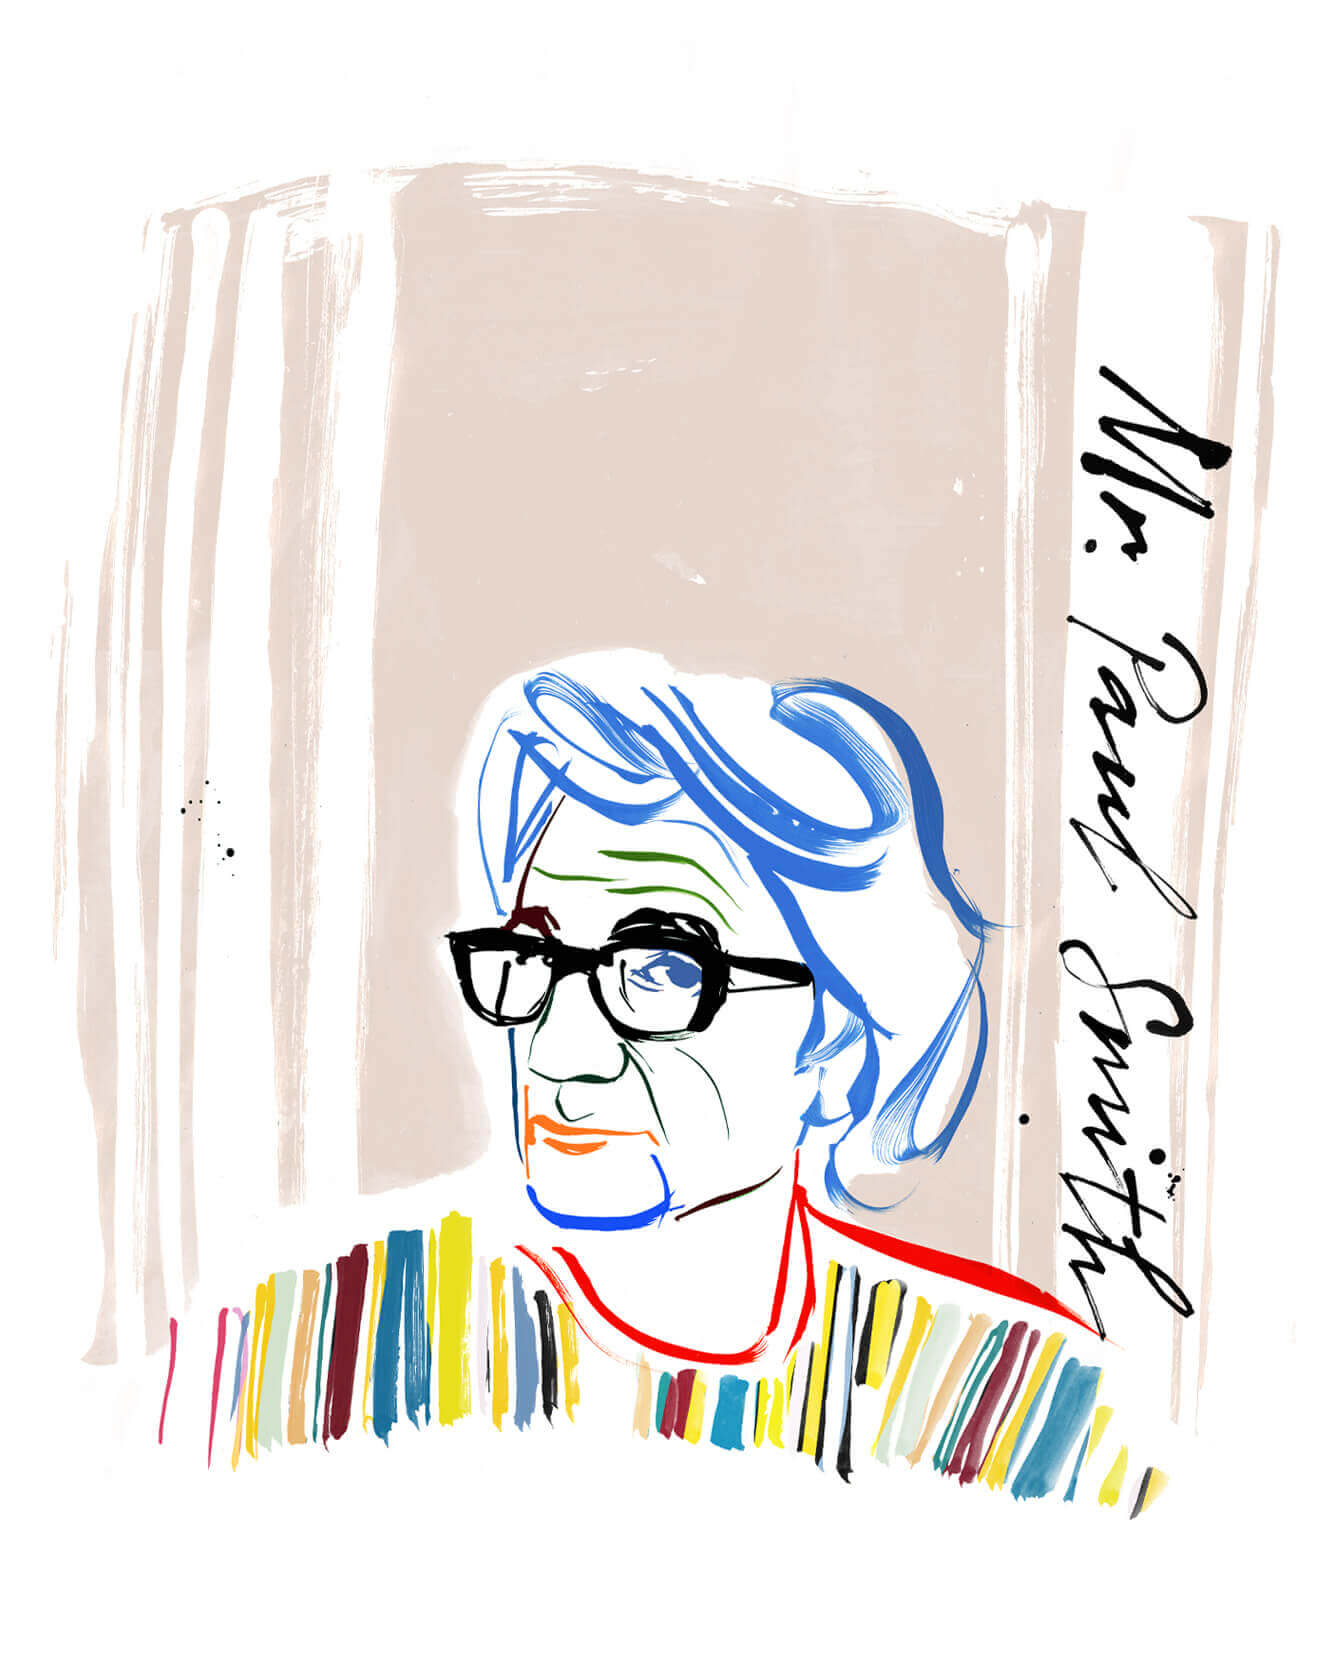 People Illustrated – Paul Smith